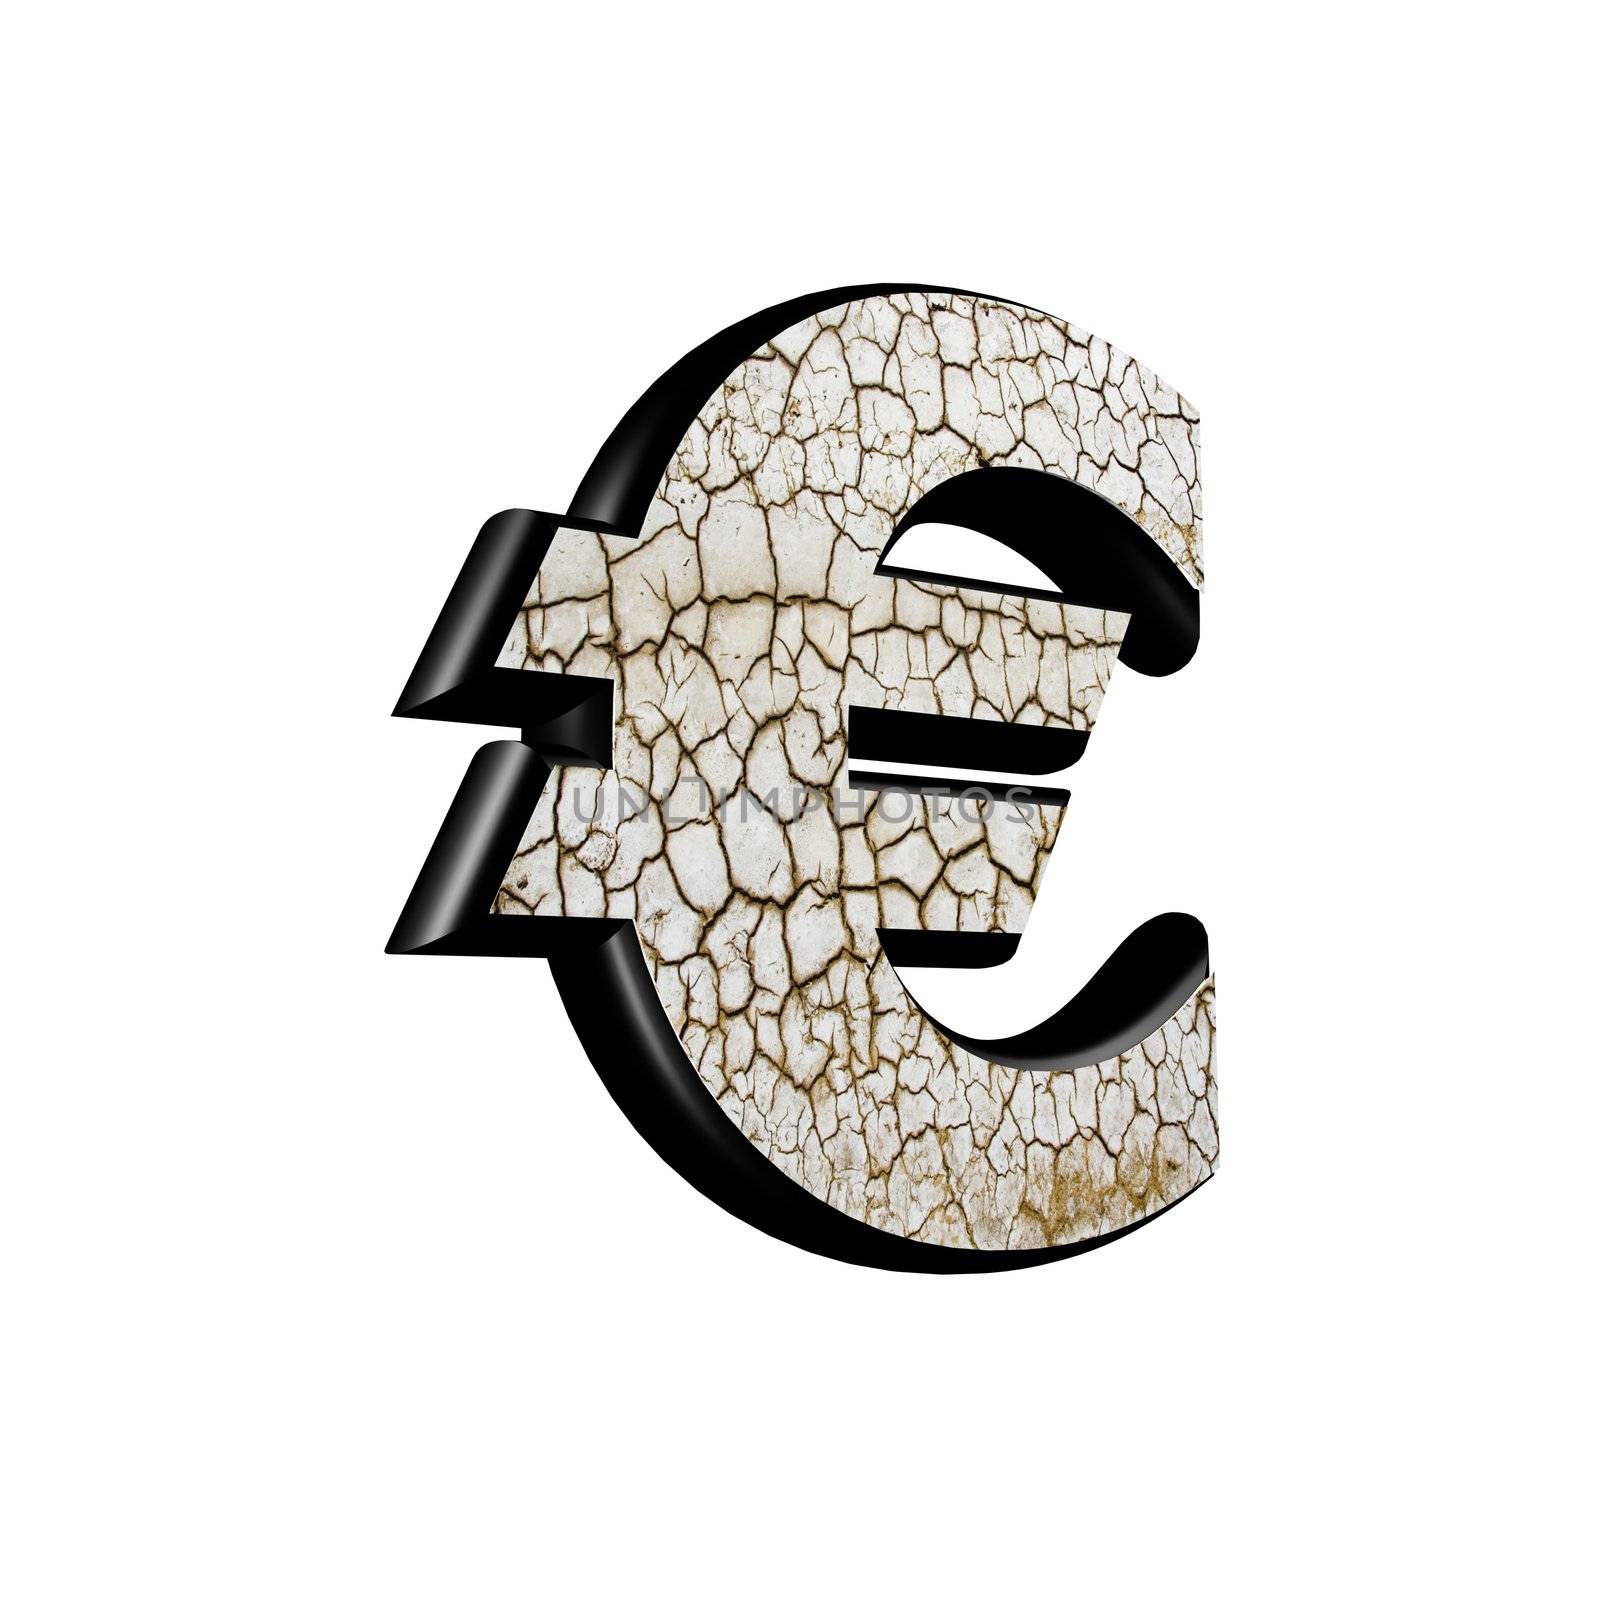 abstract 3d currency sign with dry ground texture - euros curren by chrisroll